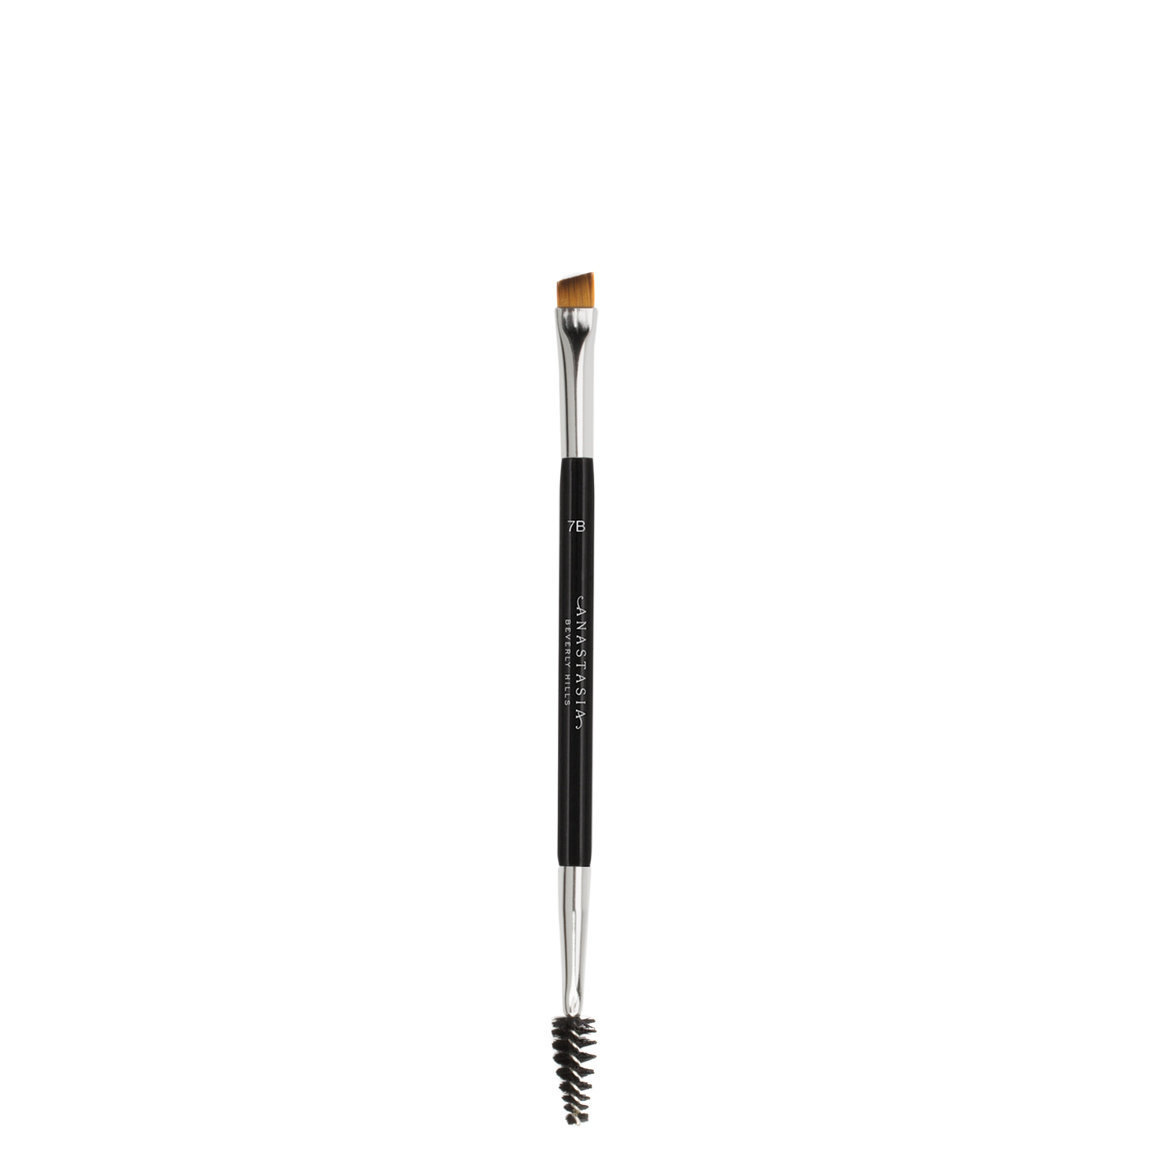 Anastasia Beverly Hills Brush 7B Dual-Ended Angled Brush alternative view 1 - product swatch.